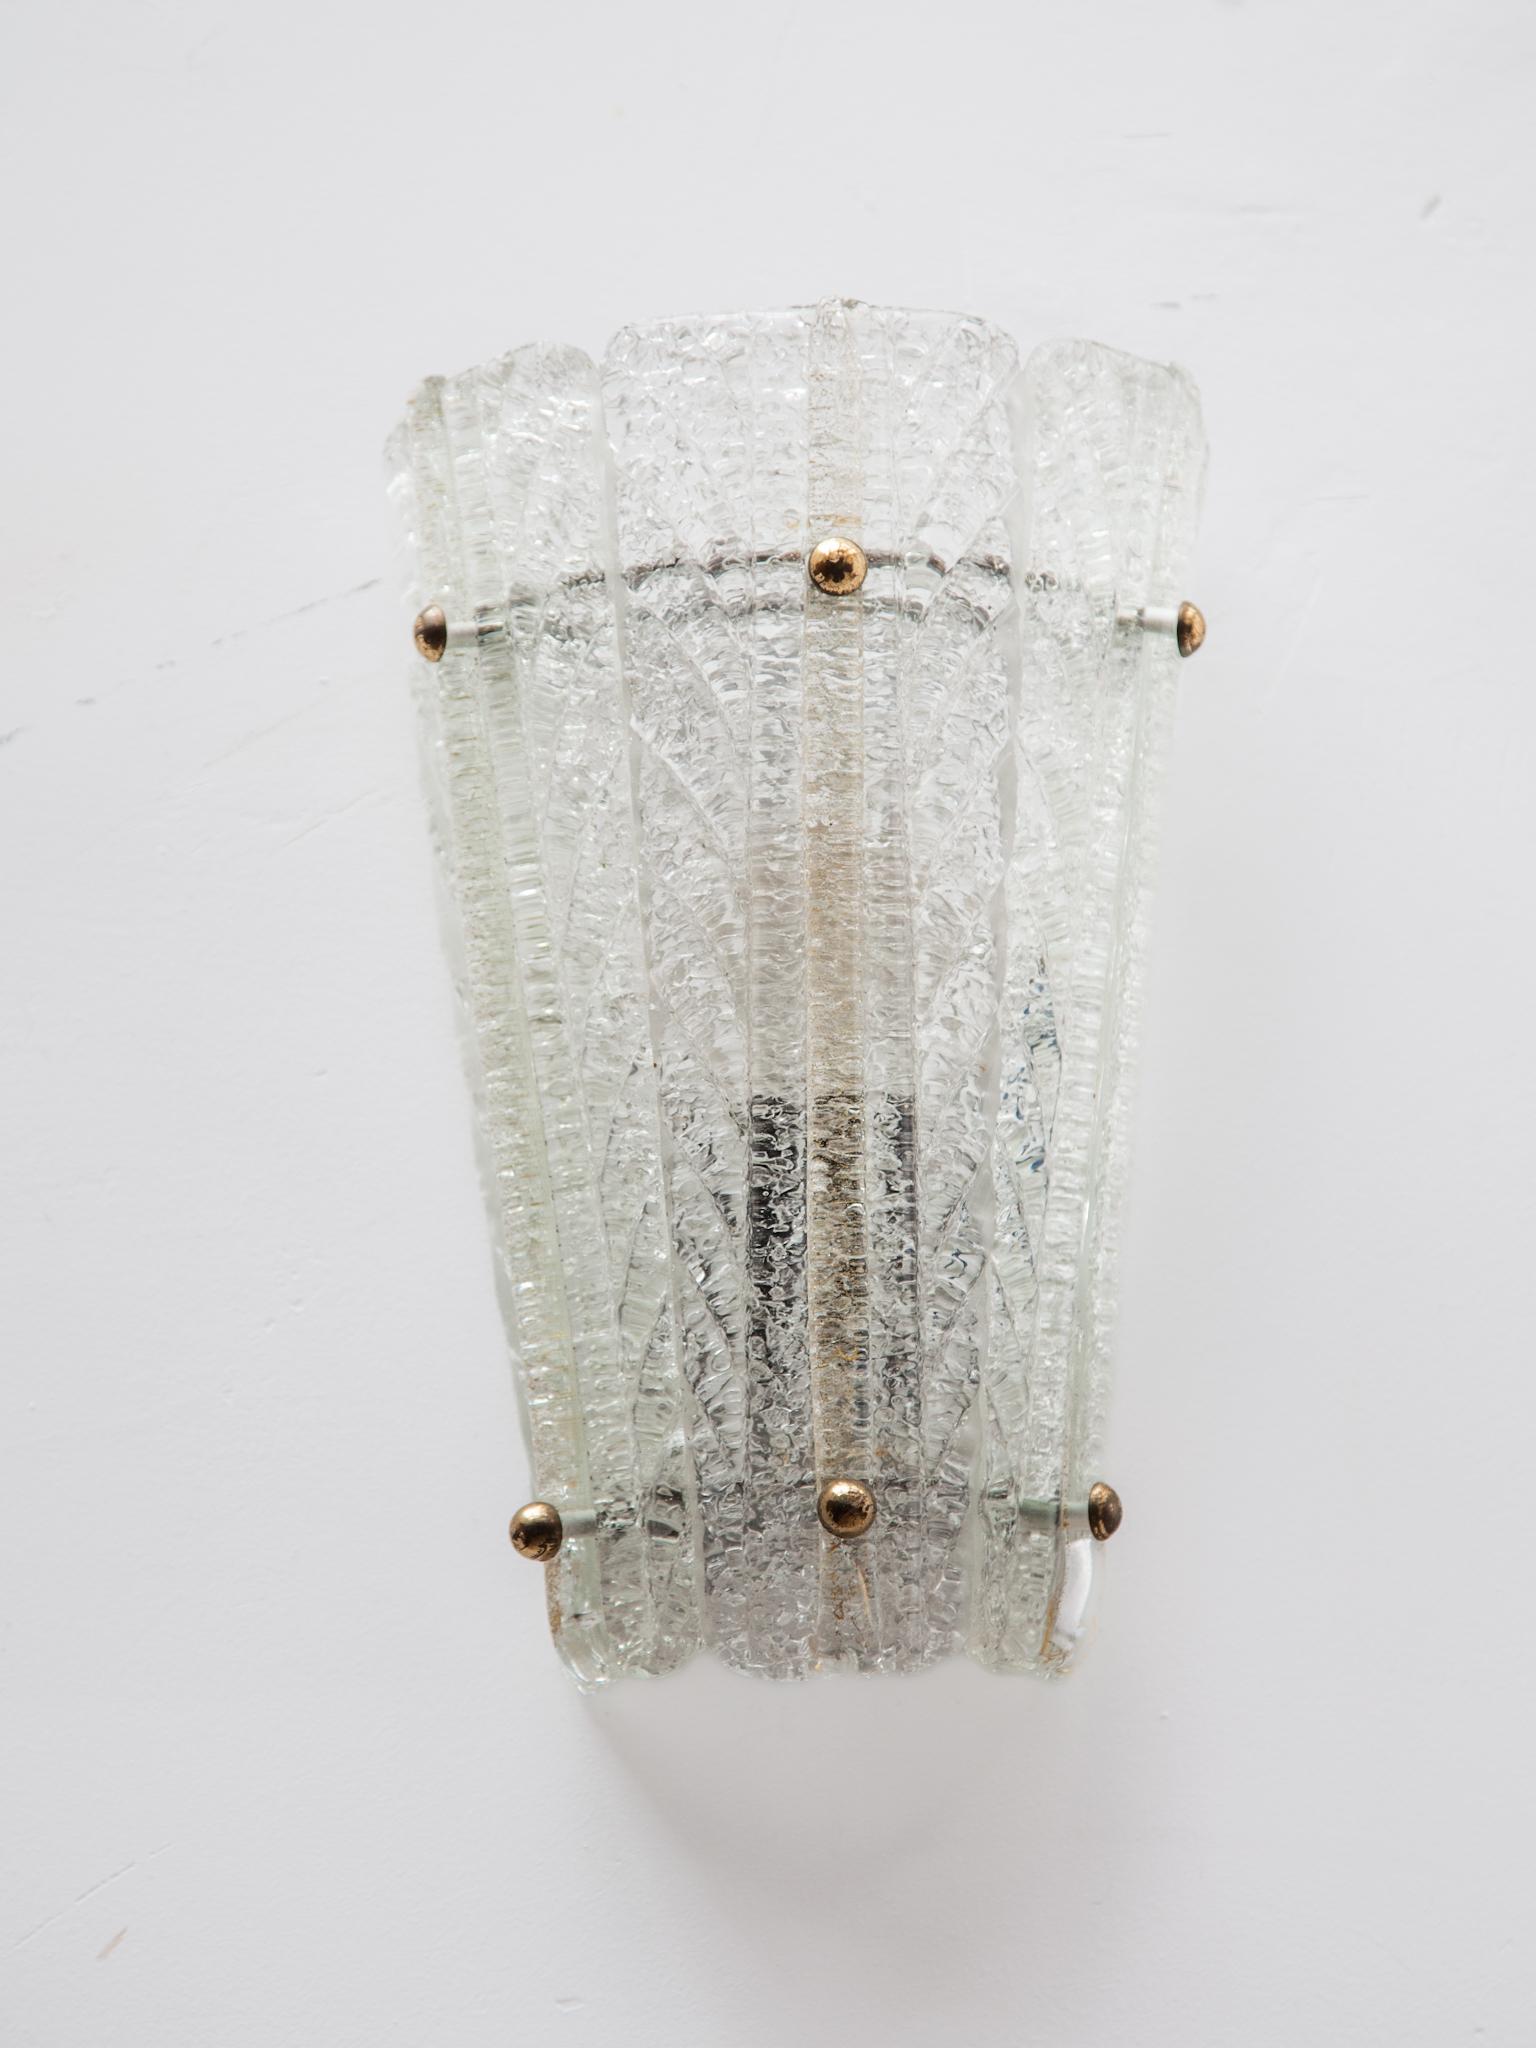 A pair of mid-century wall-lights, sconces with clear ice glass pattern made by Doria Leuchten, Germany, manufactured, circa 1970. 
High quality and in very good condition. Cleaned, well-wired, and ready to use. Each sconce requires 1 x E14 small